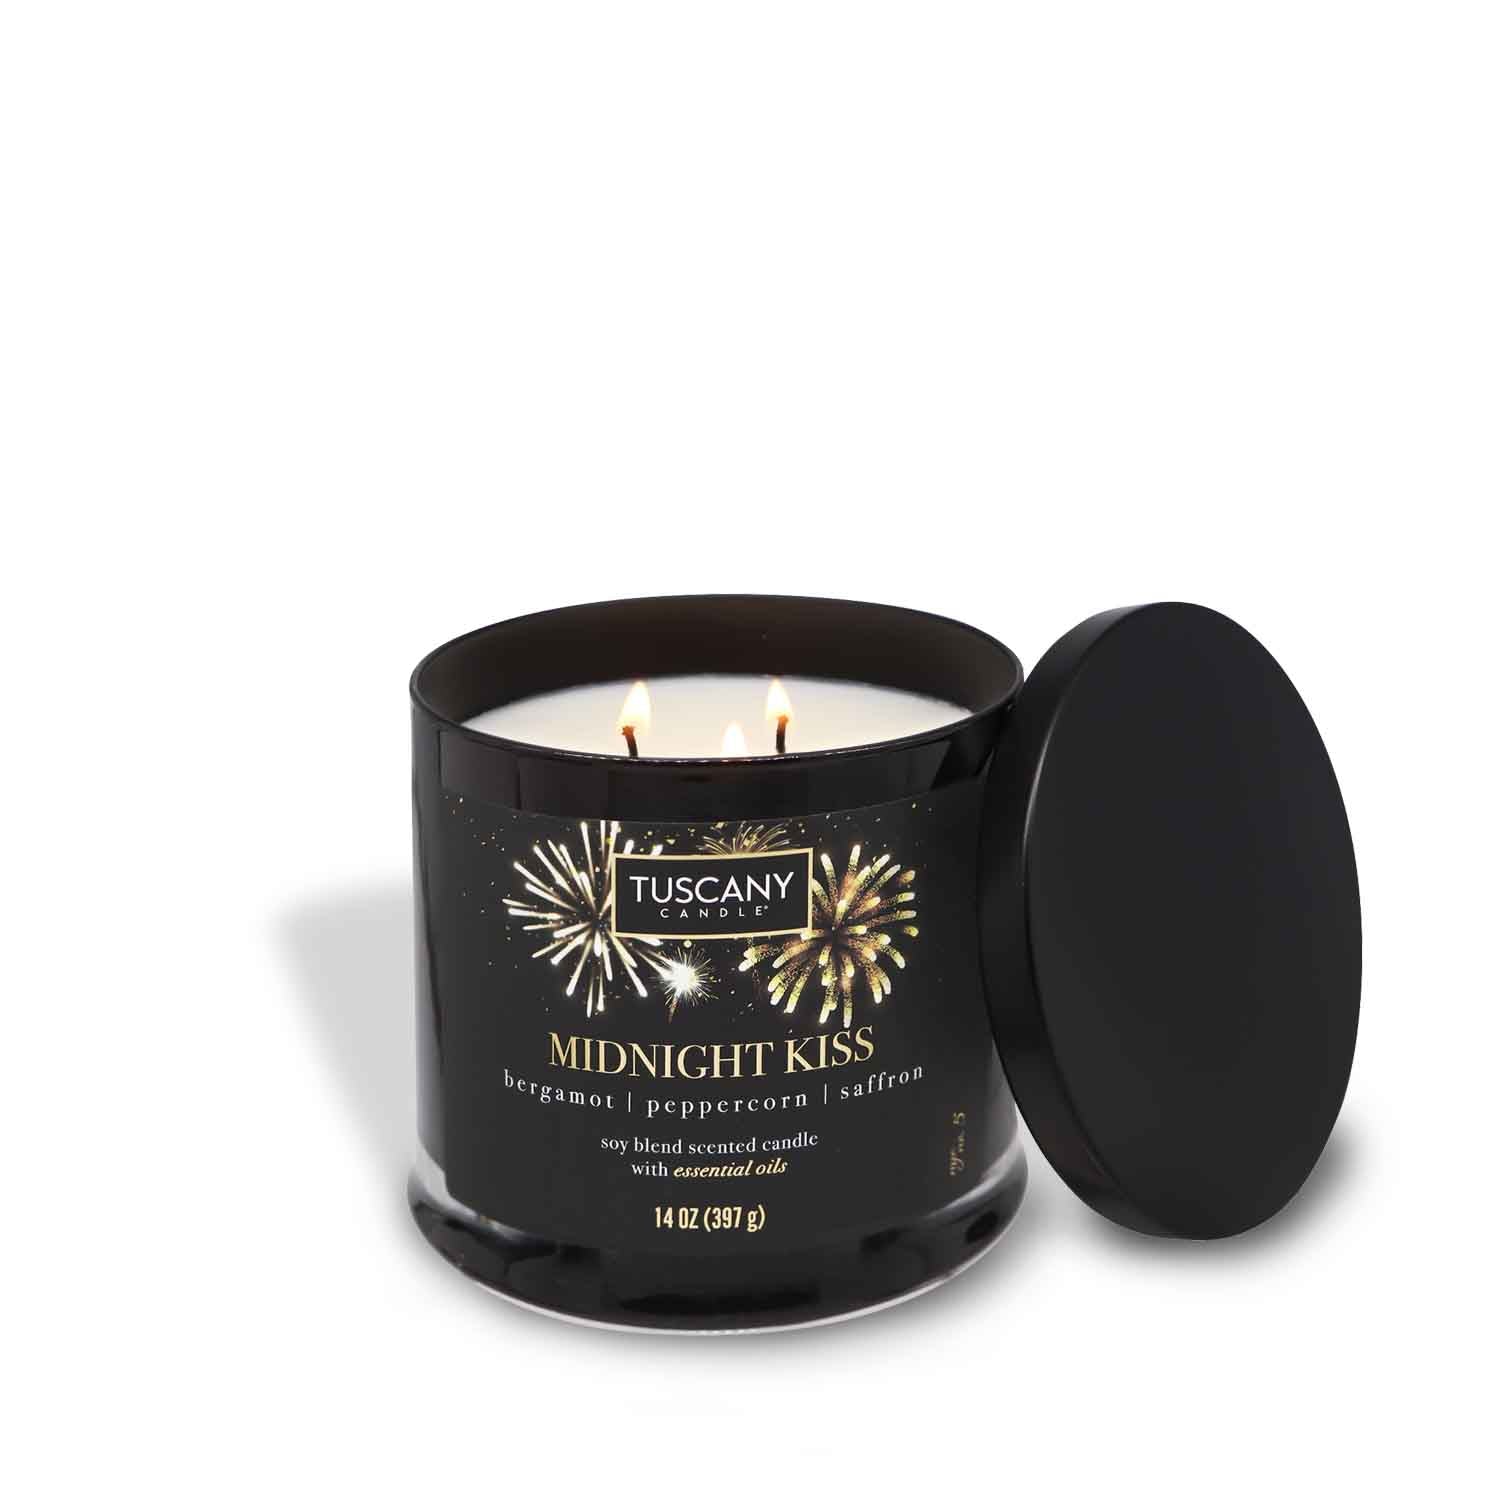 Spiced Cashmere Scented Jar + Homme Candle – Collecti (15 Heritage oz)